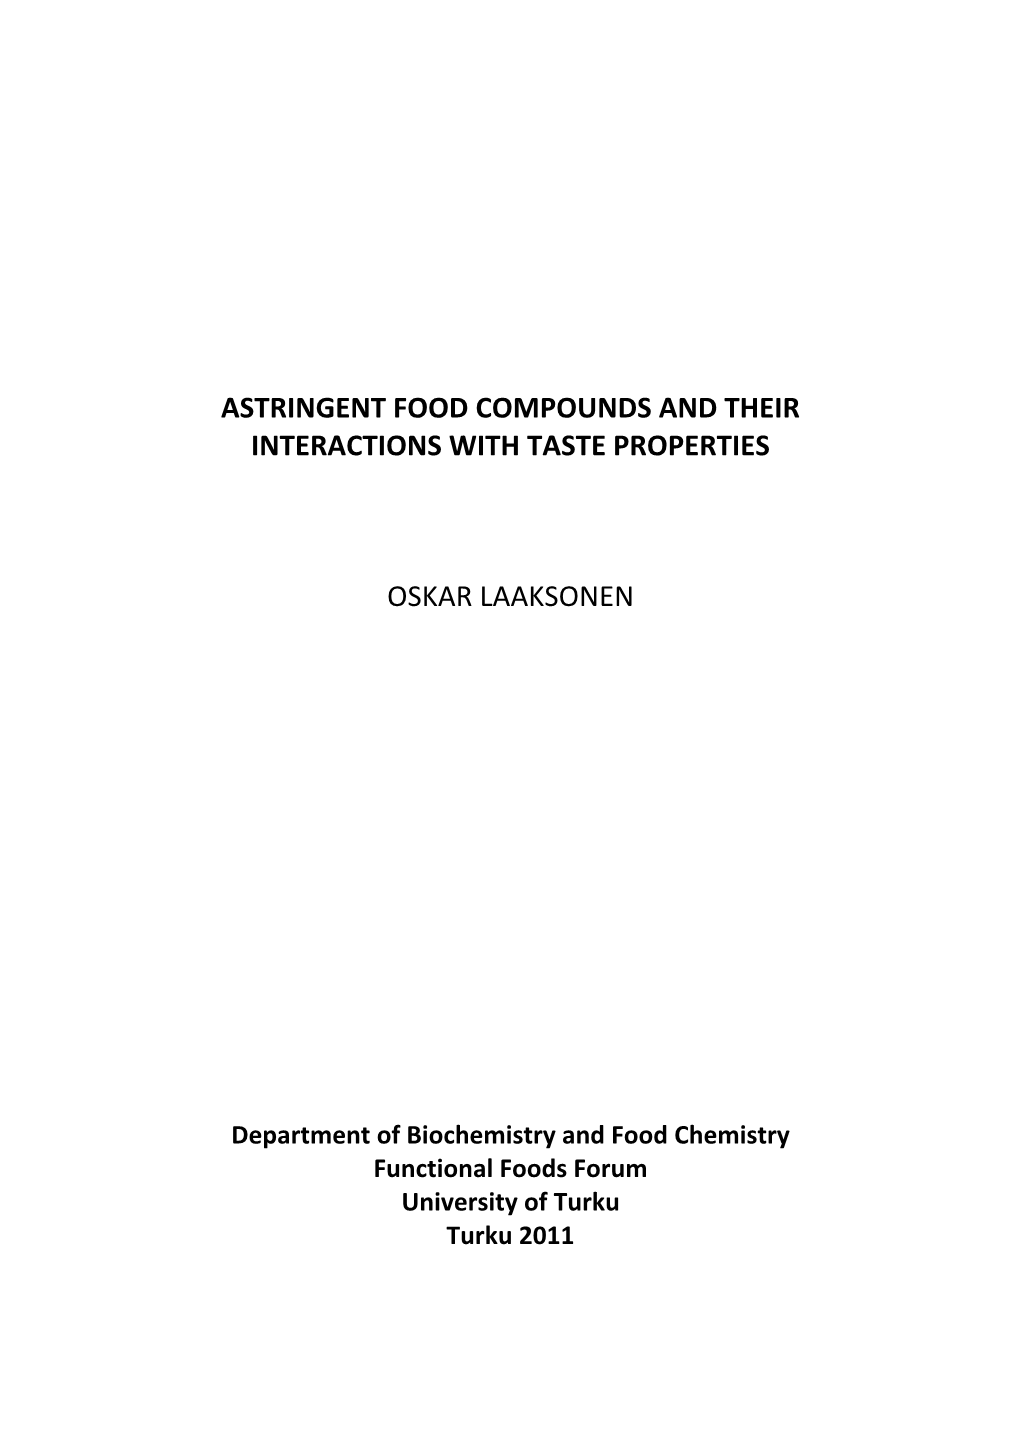 Astringent Food Compounds and Their Interactions with Taste Properties